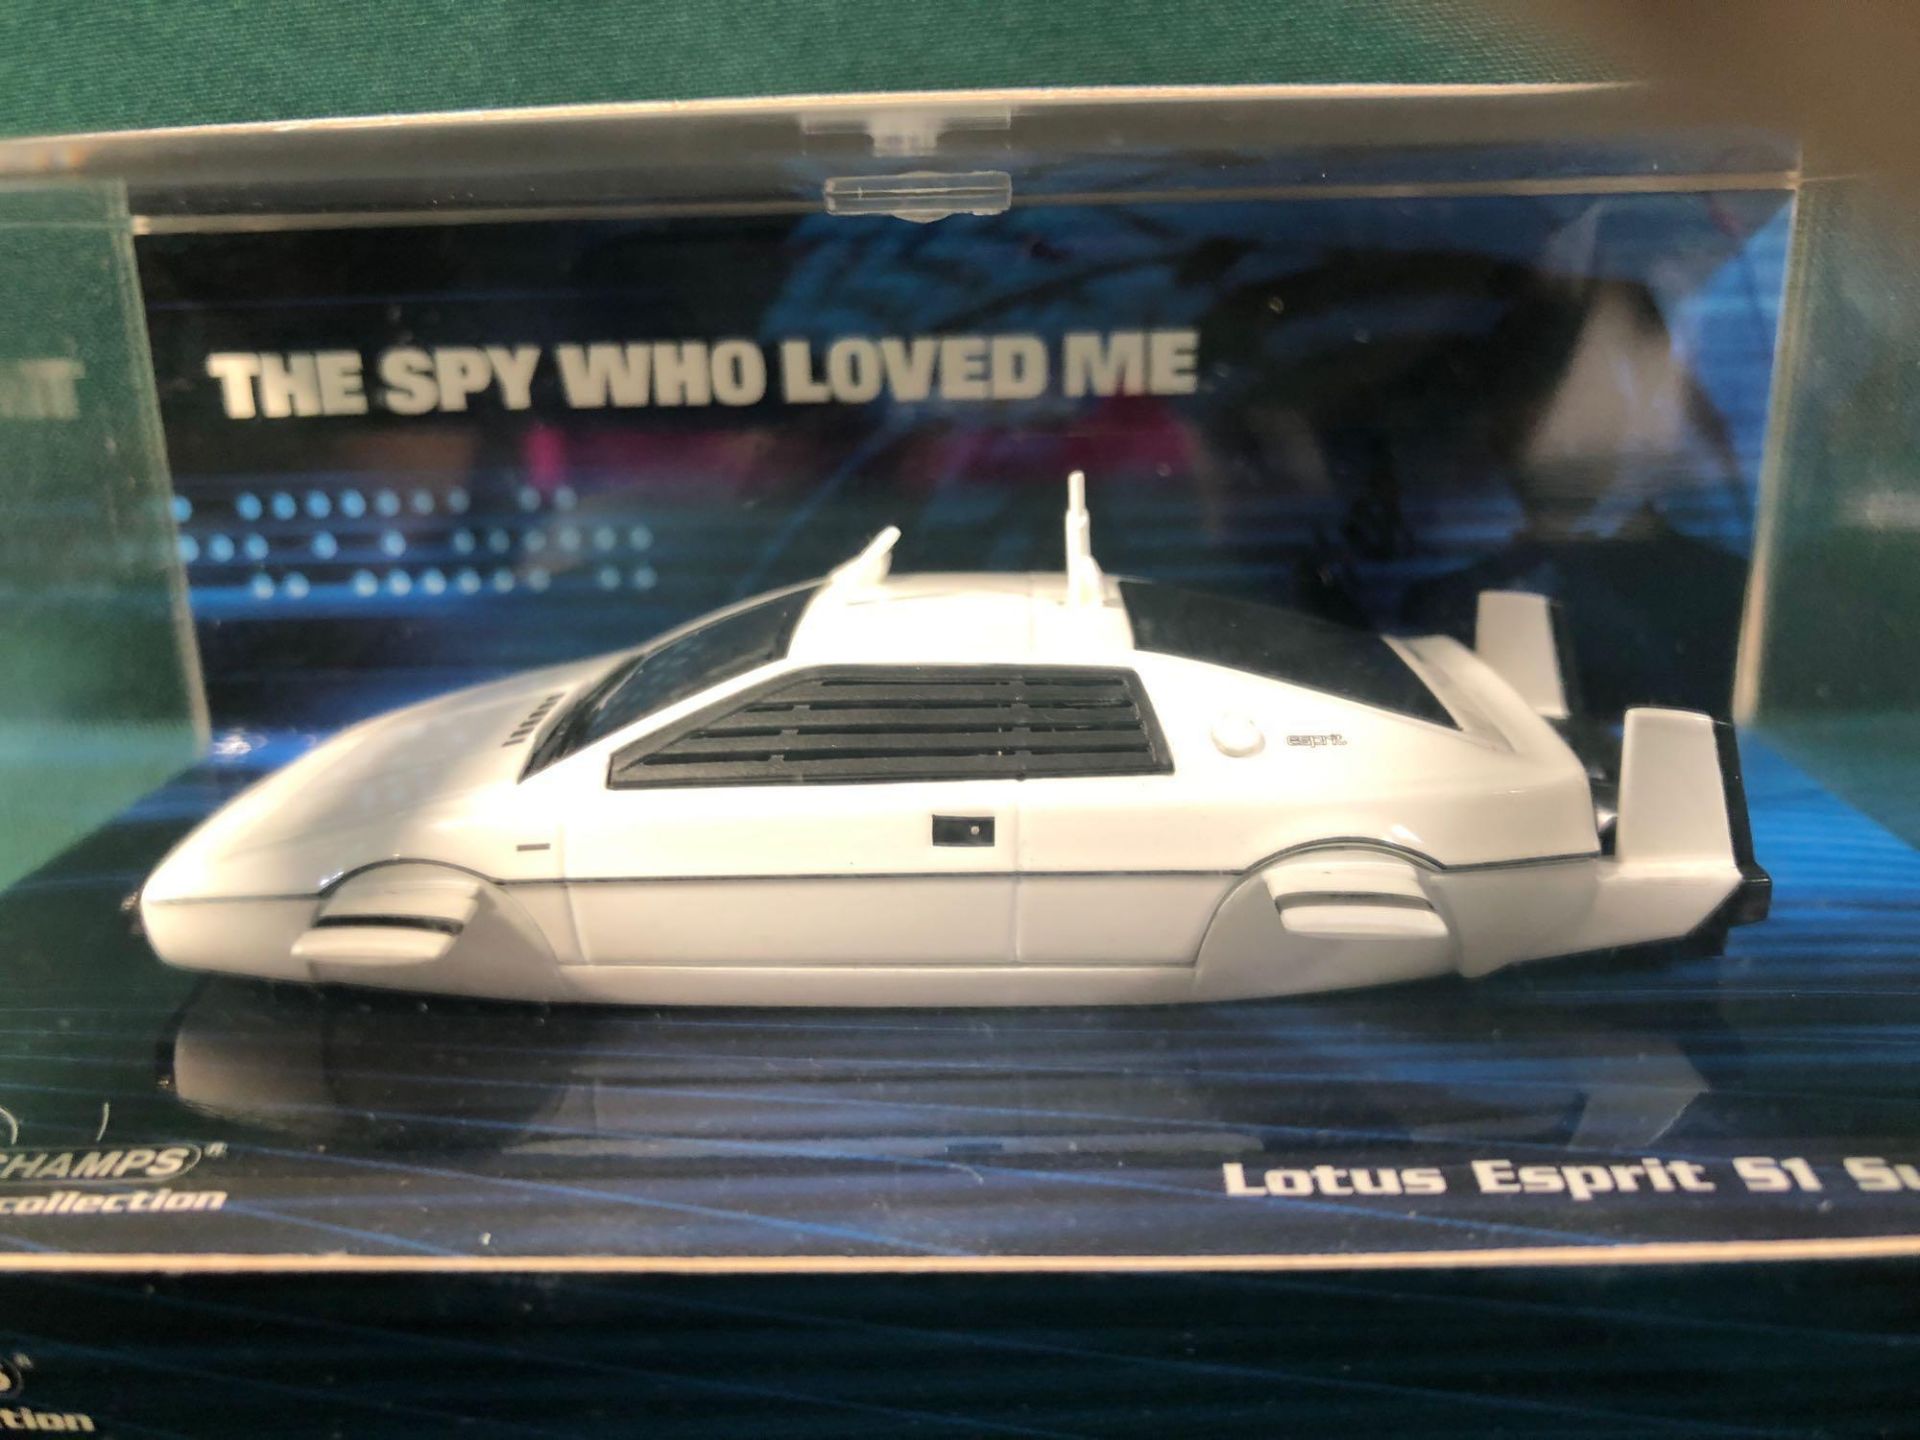 The Minichamps Bond Collection Diecast #400 135270 Lotus Esprit S1 Submarine From The Spy Who